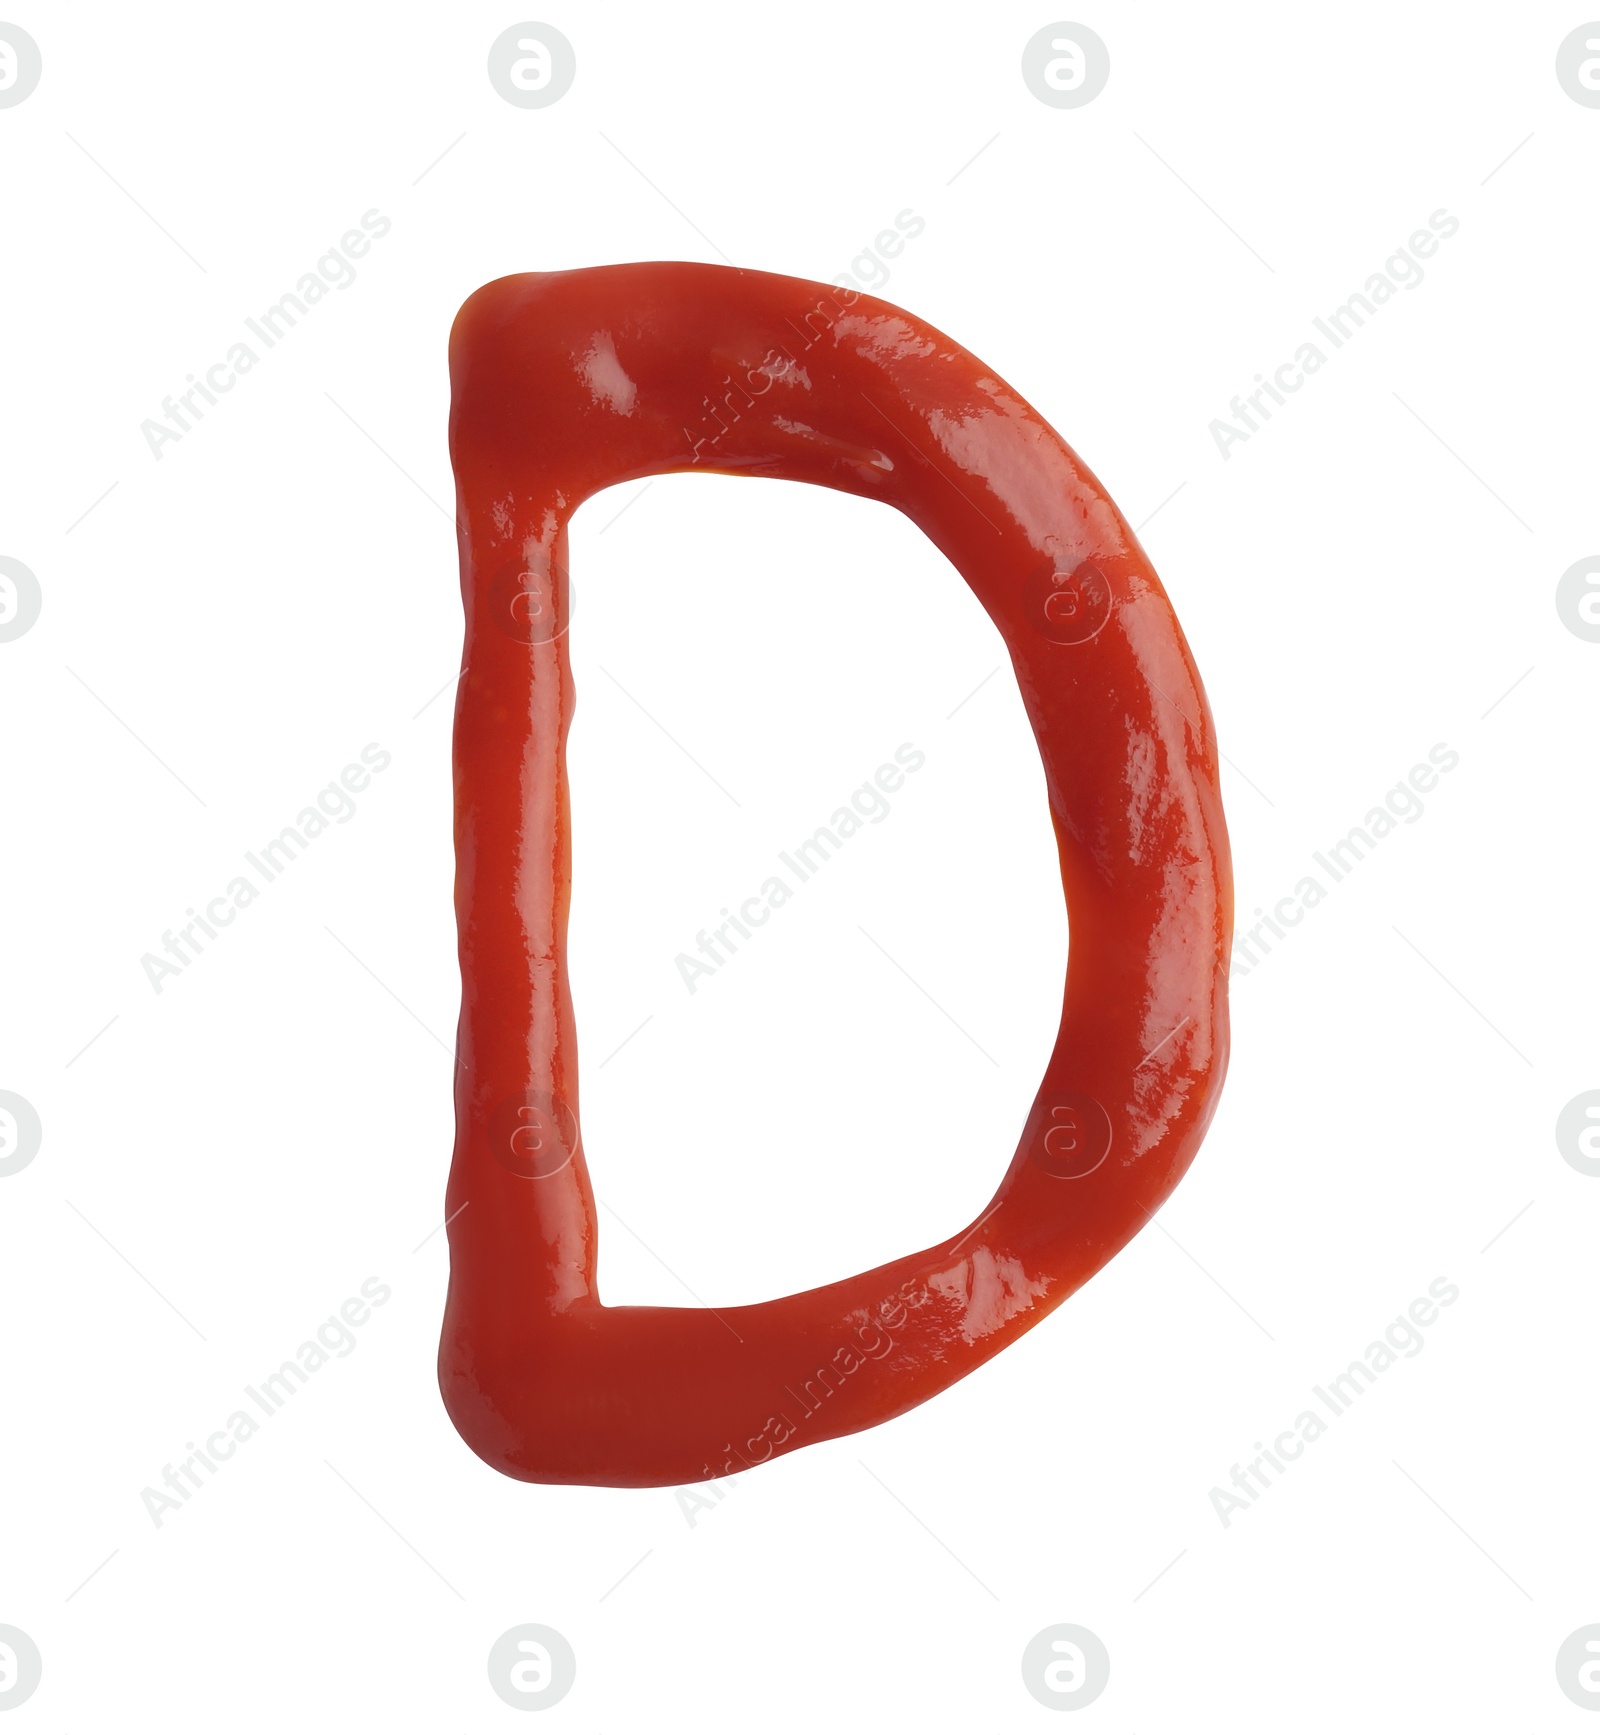 Photo of Letter D written with ketchup on white background